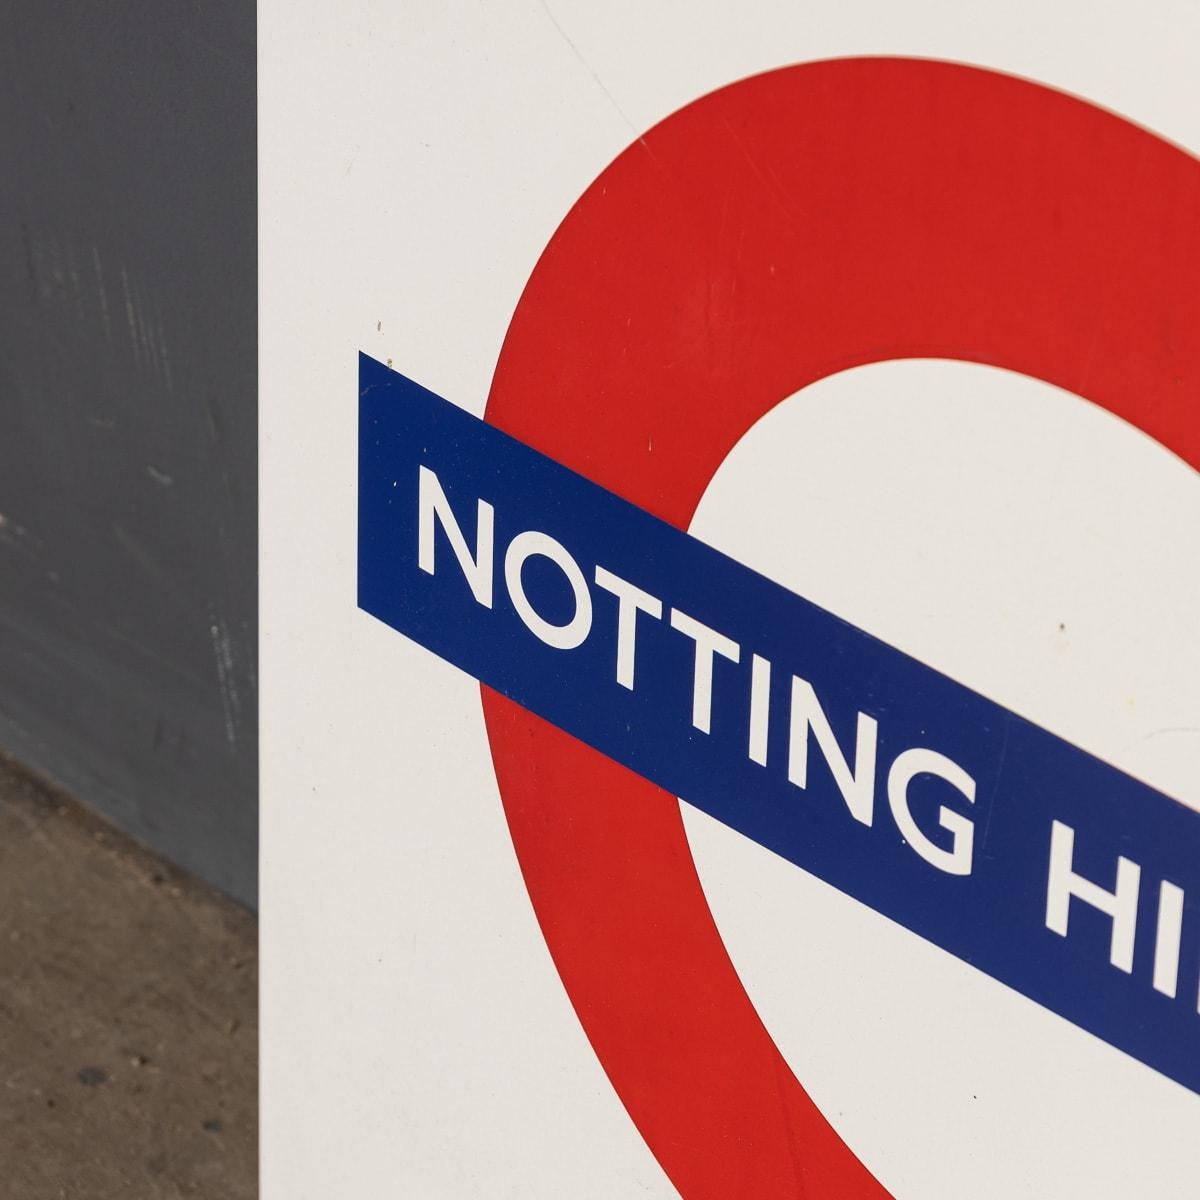 Late 20th Century 20th Century Enamelled London Underground Notting Hill Gate Station Sign c.1970 For Sale